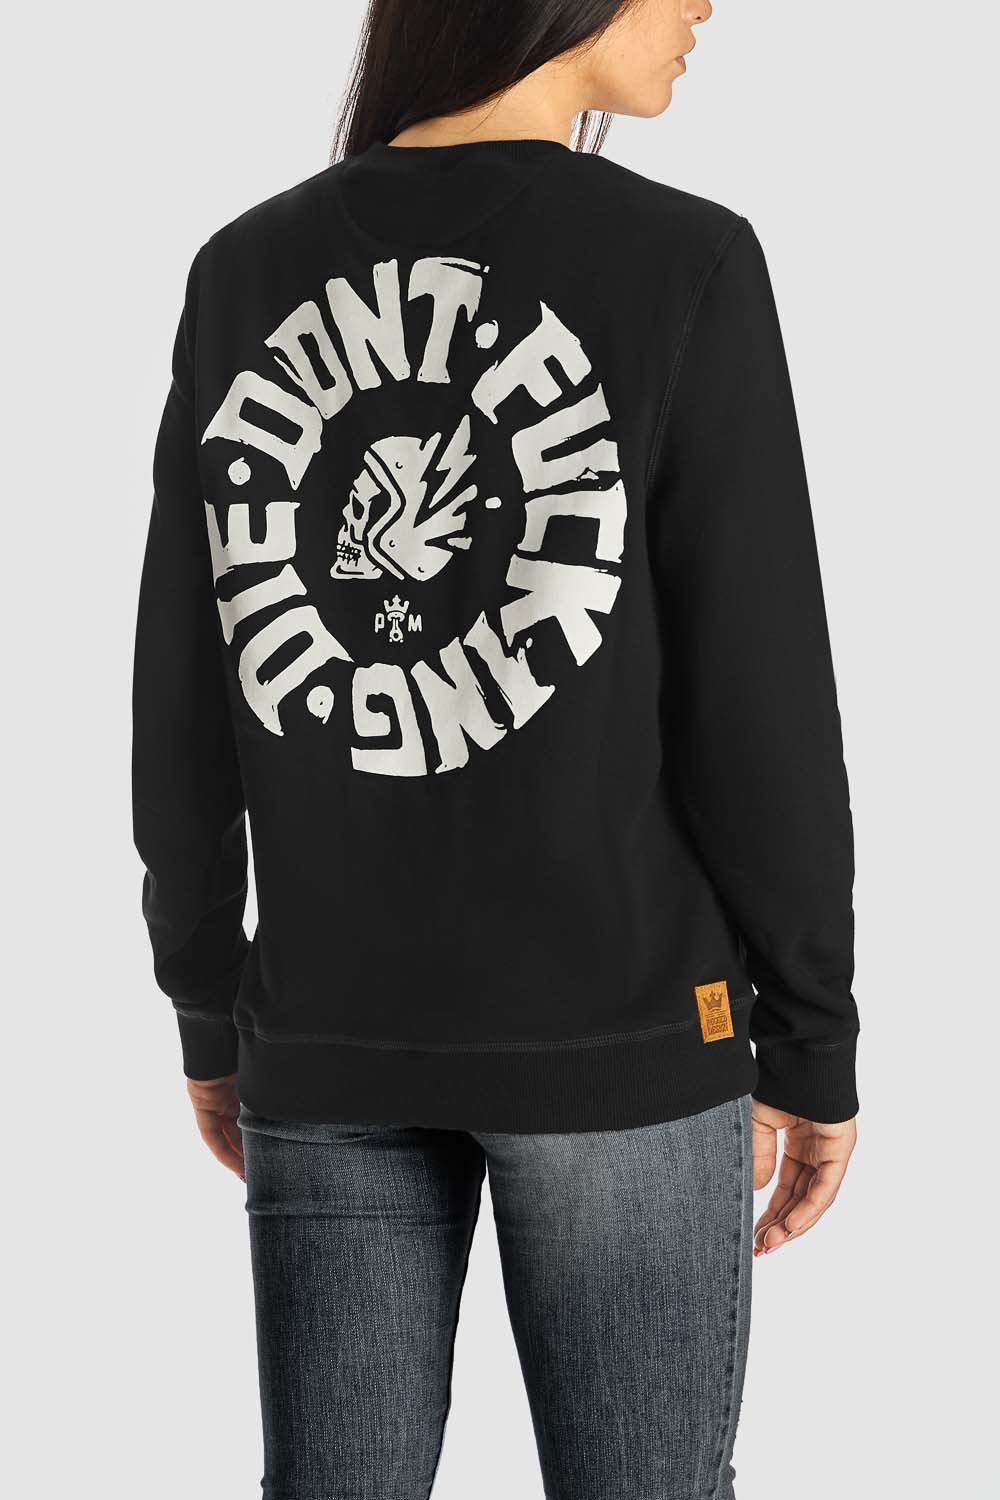 A women wearing black Pando Moto motorcycle sweatshirt with white &quot;don&#39;t fucking die&quot;motive on the back